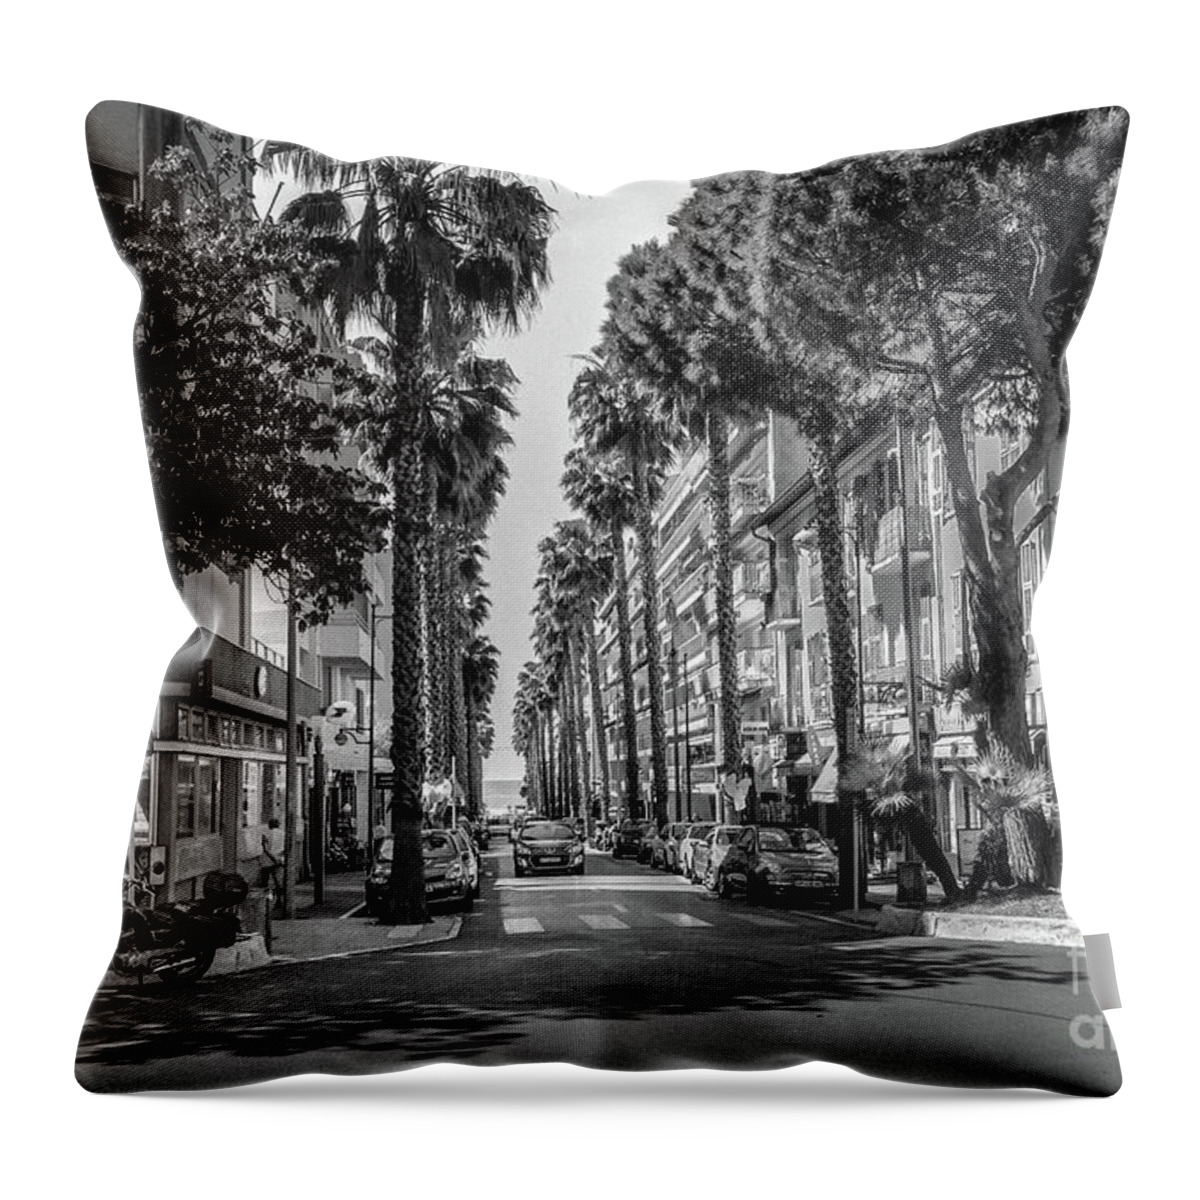 Black And White Throw Pillow featuring the photograph Palm Trees On Street In Antibes, France, Blk Wht by Liesl Walsh